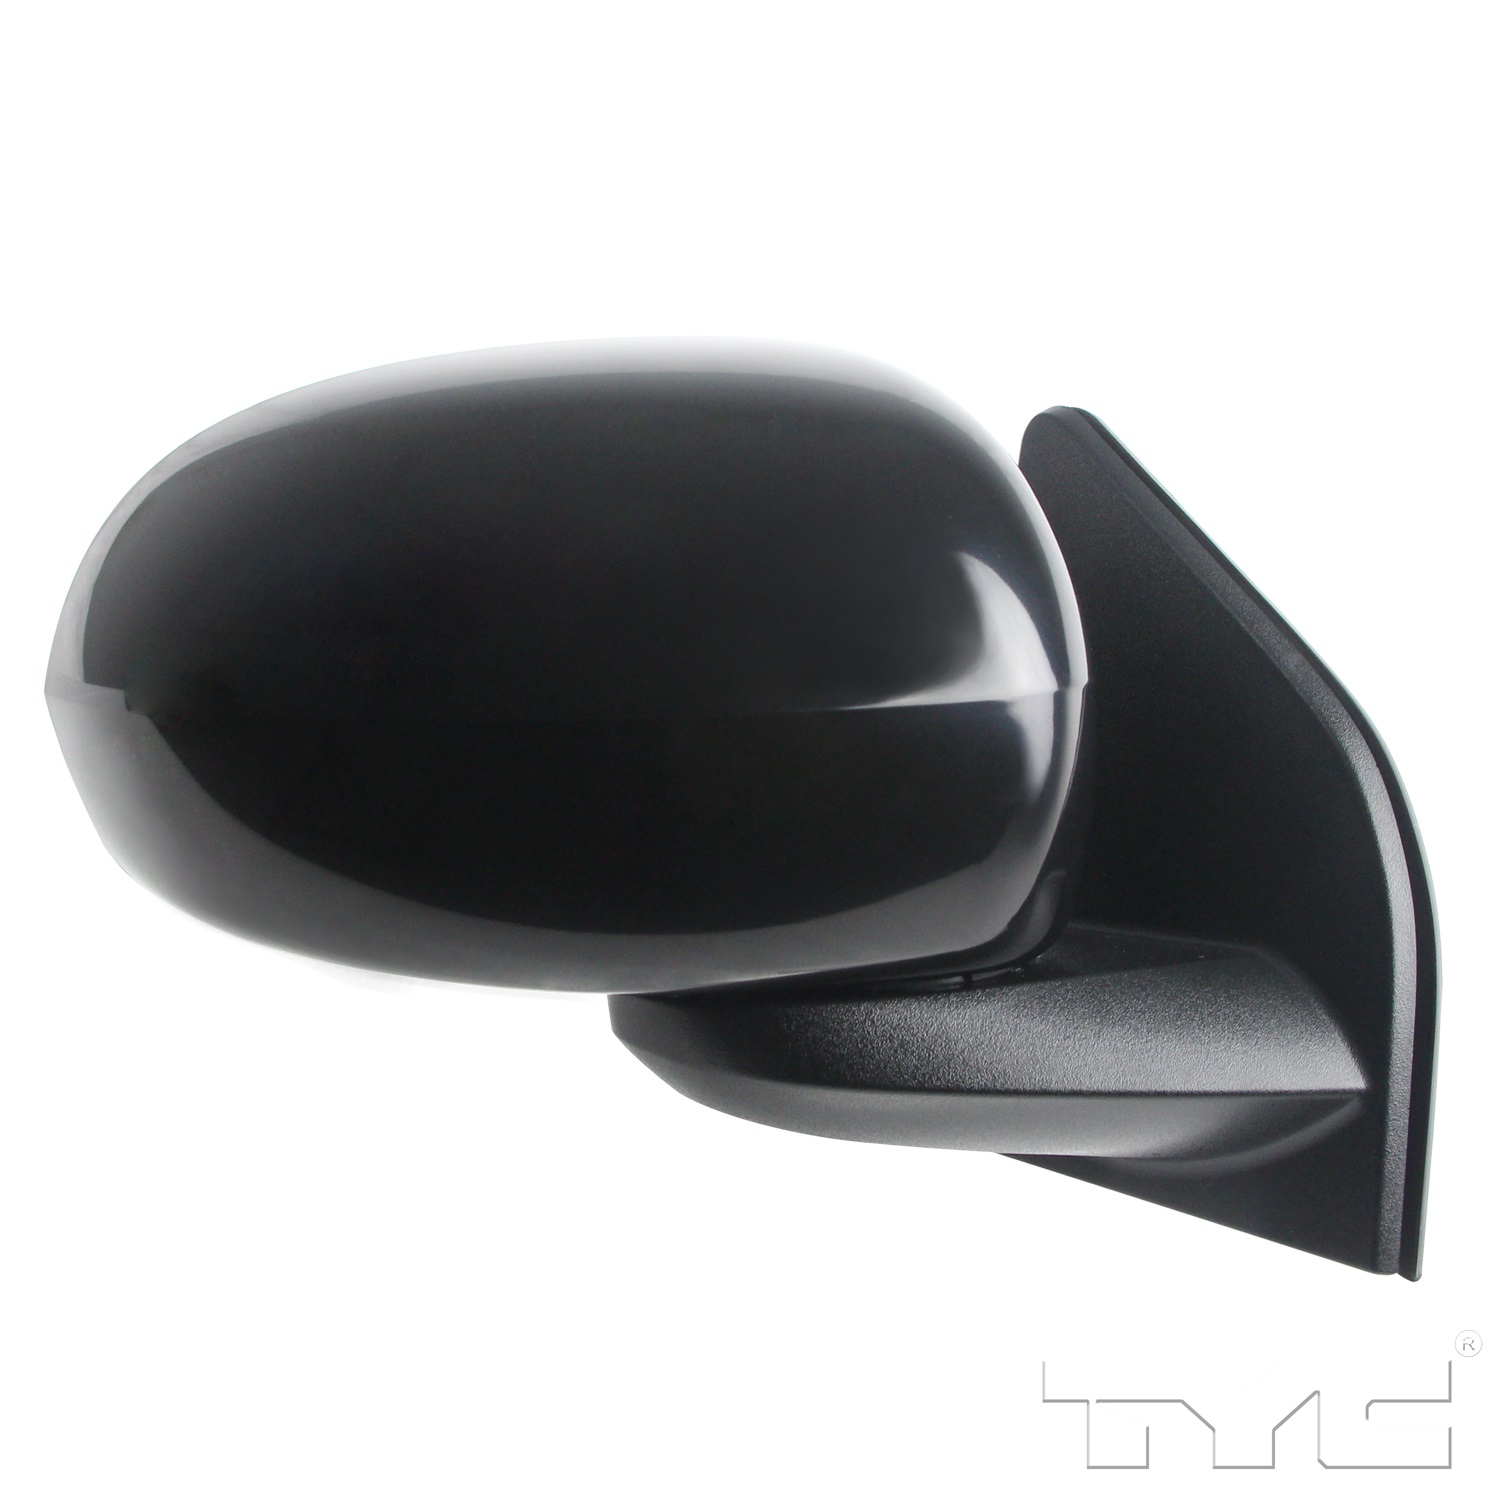 Aftermarket MIRRORS for JEEP - COMPASS, COMPASS,14-15,RT Mirror outside rear view